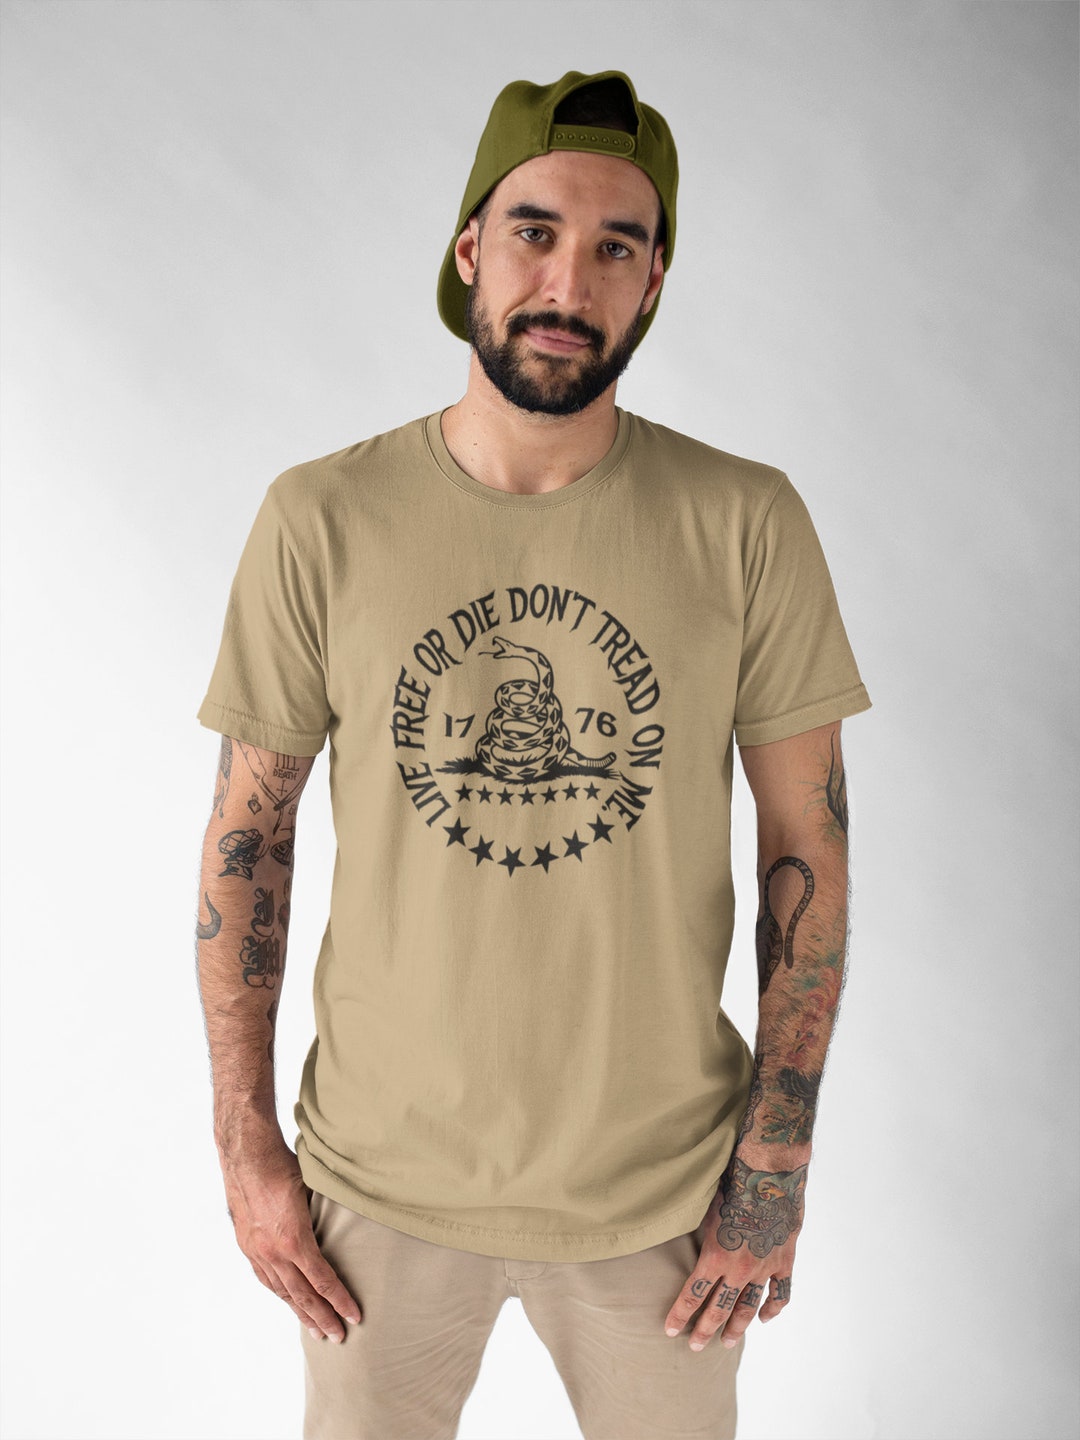 Don't Tread on Me Shirt Patriotic Tee for Men and - Etsy